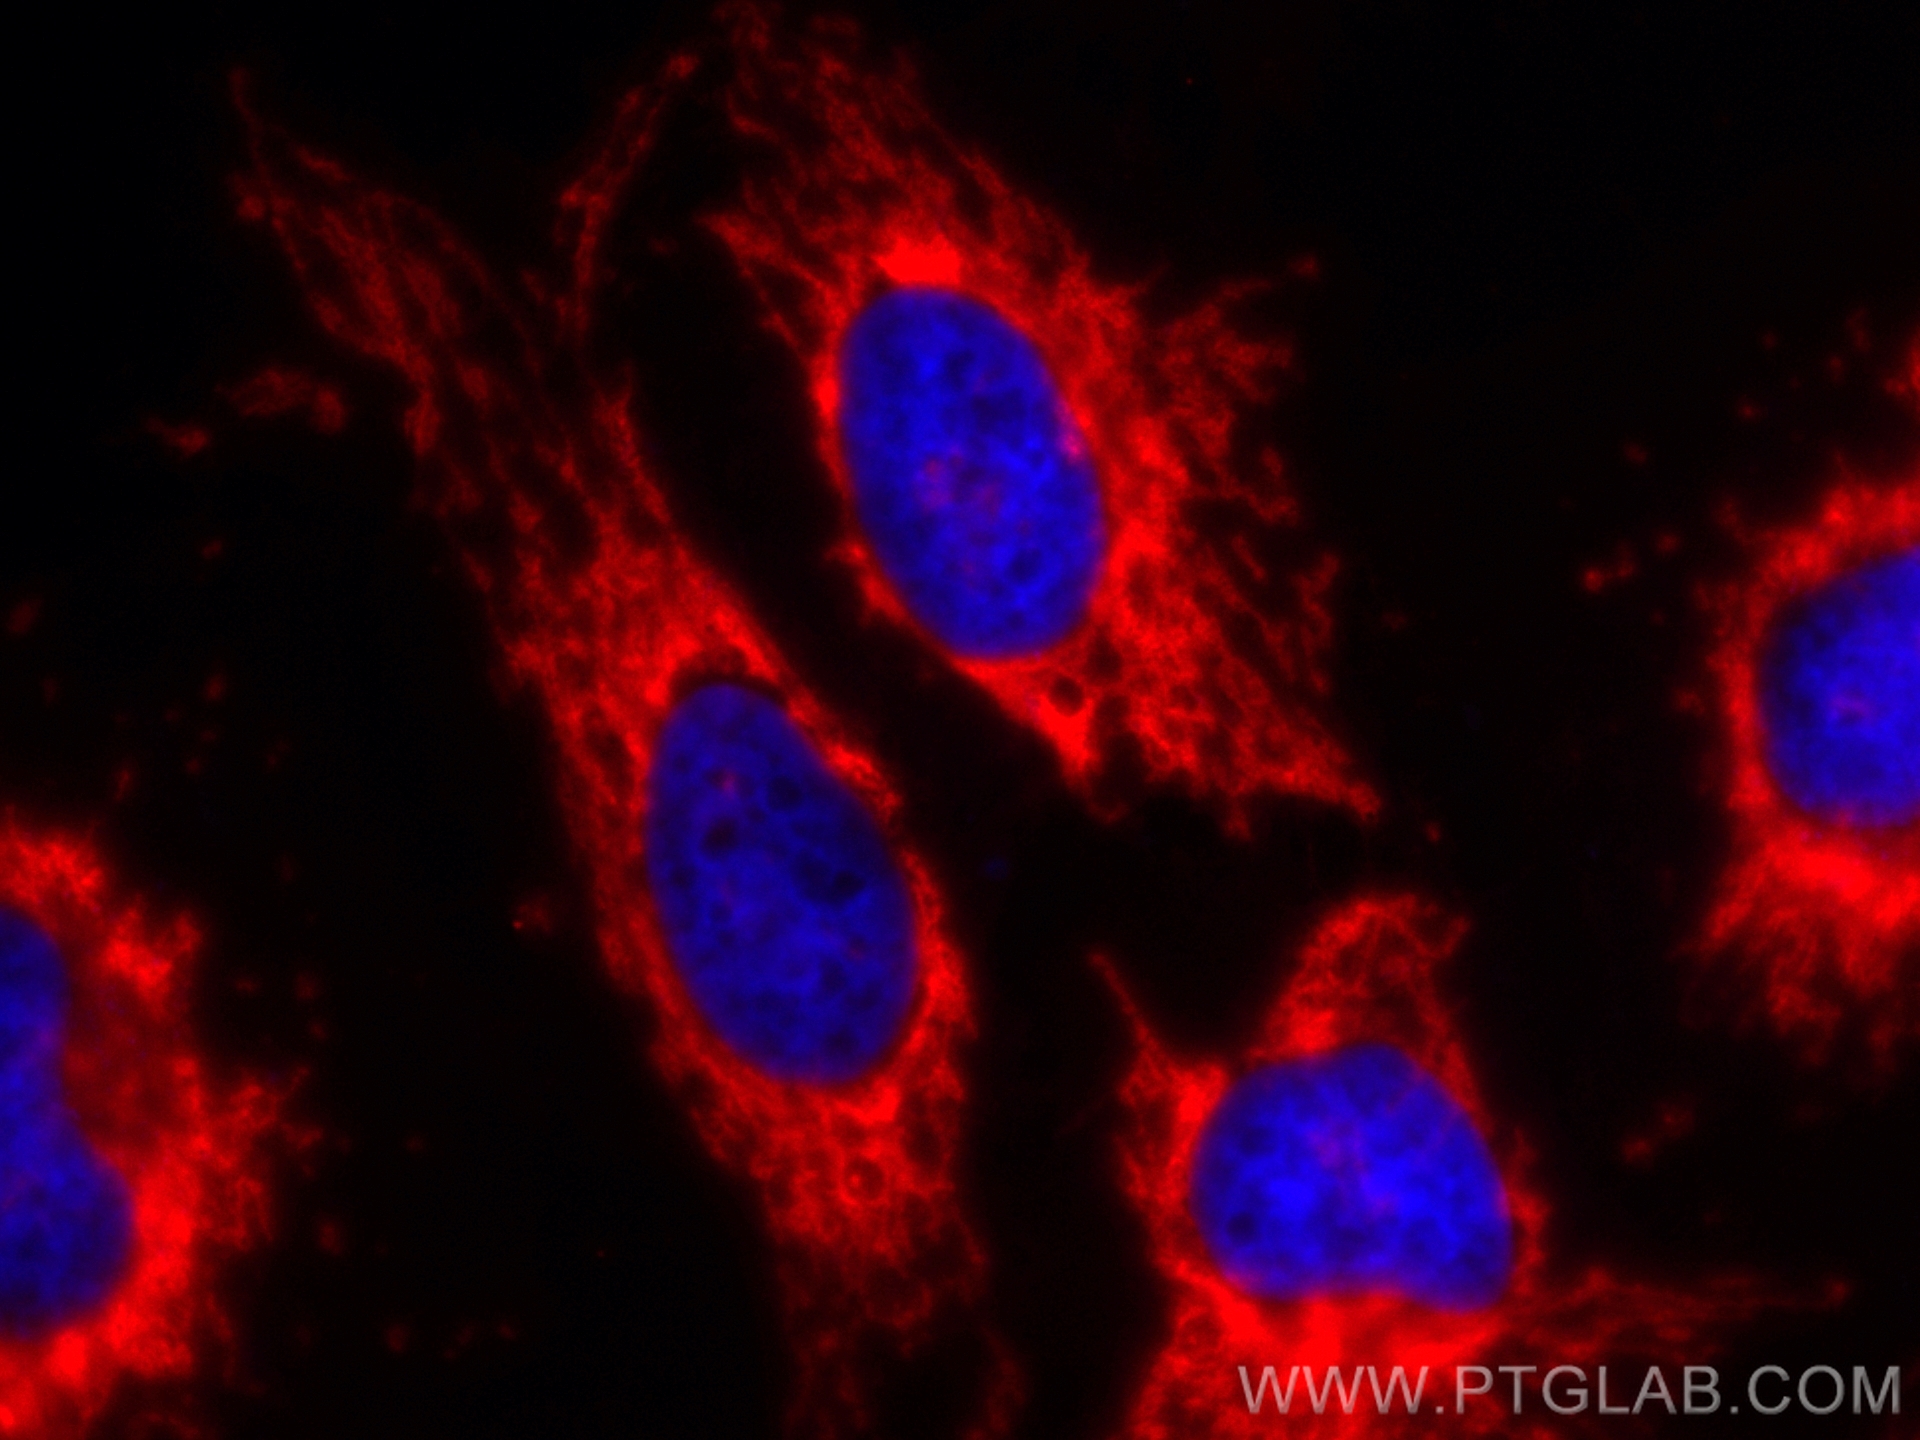 Immunofluorescence of HeLa: PFA-fixed HeLa cells were stained with anti-TOM20 antibody (66777-1-Ig) labeled with FlexAble HRP Antibody Labeling Kit for Mouse IgG2b (KFA065) and Tyramide-594 (red). Cell nuclei are in blue. 